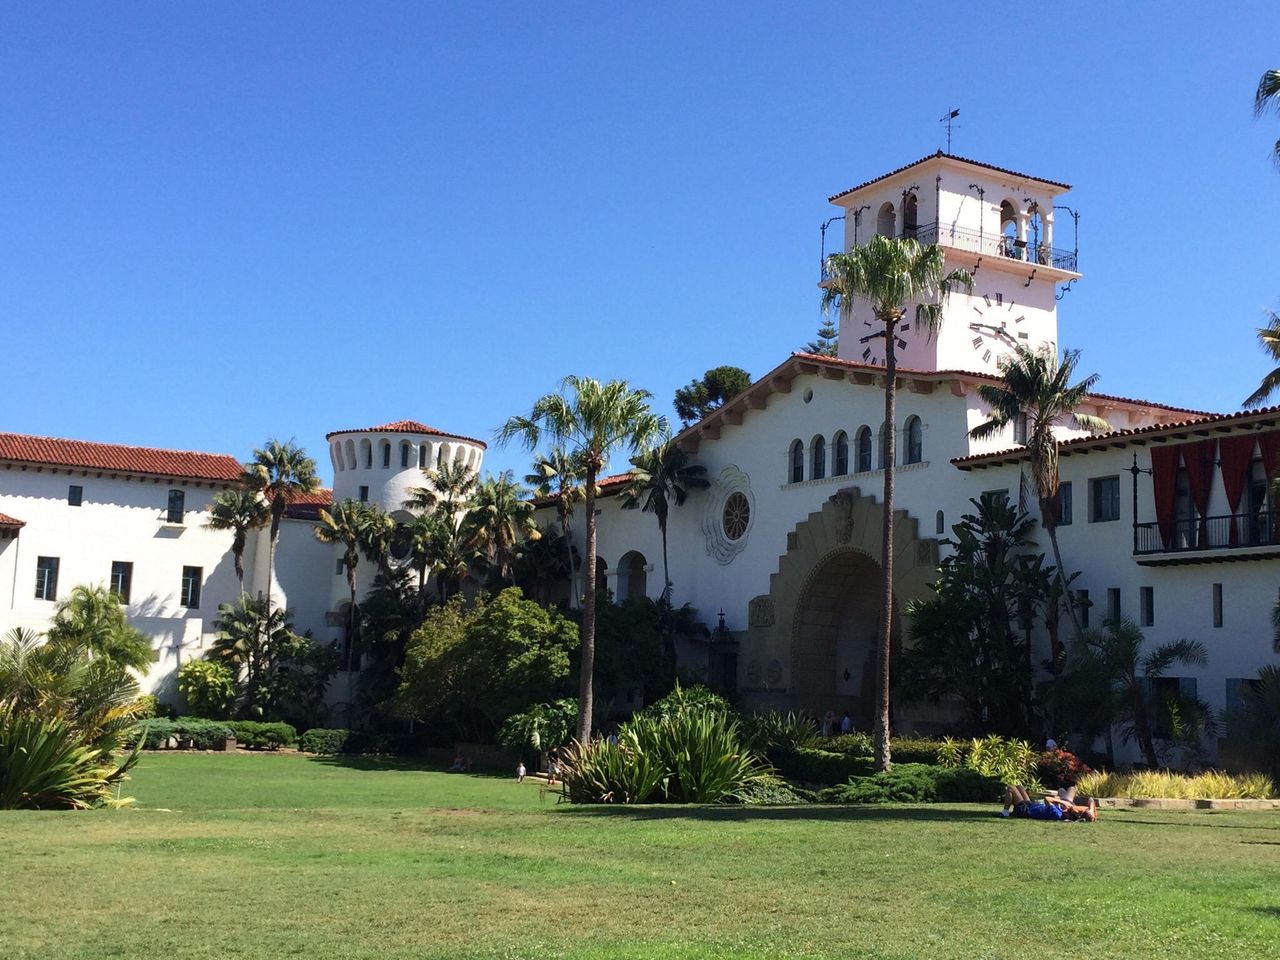 Experience the Historic Charm of Santa Barbara Courthouse: A Journey Through Time